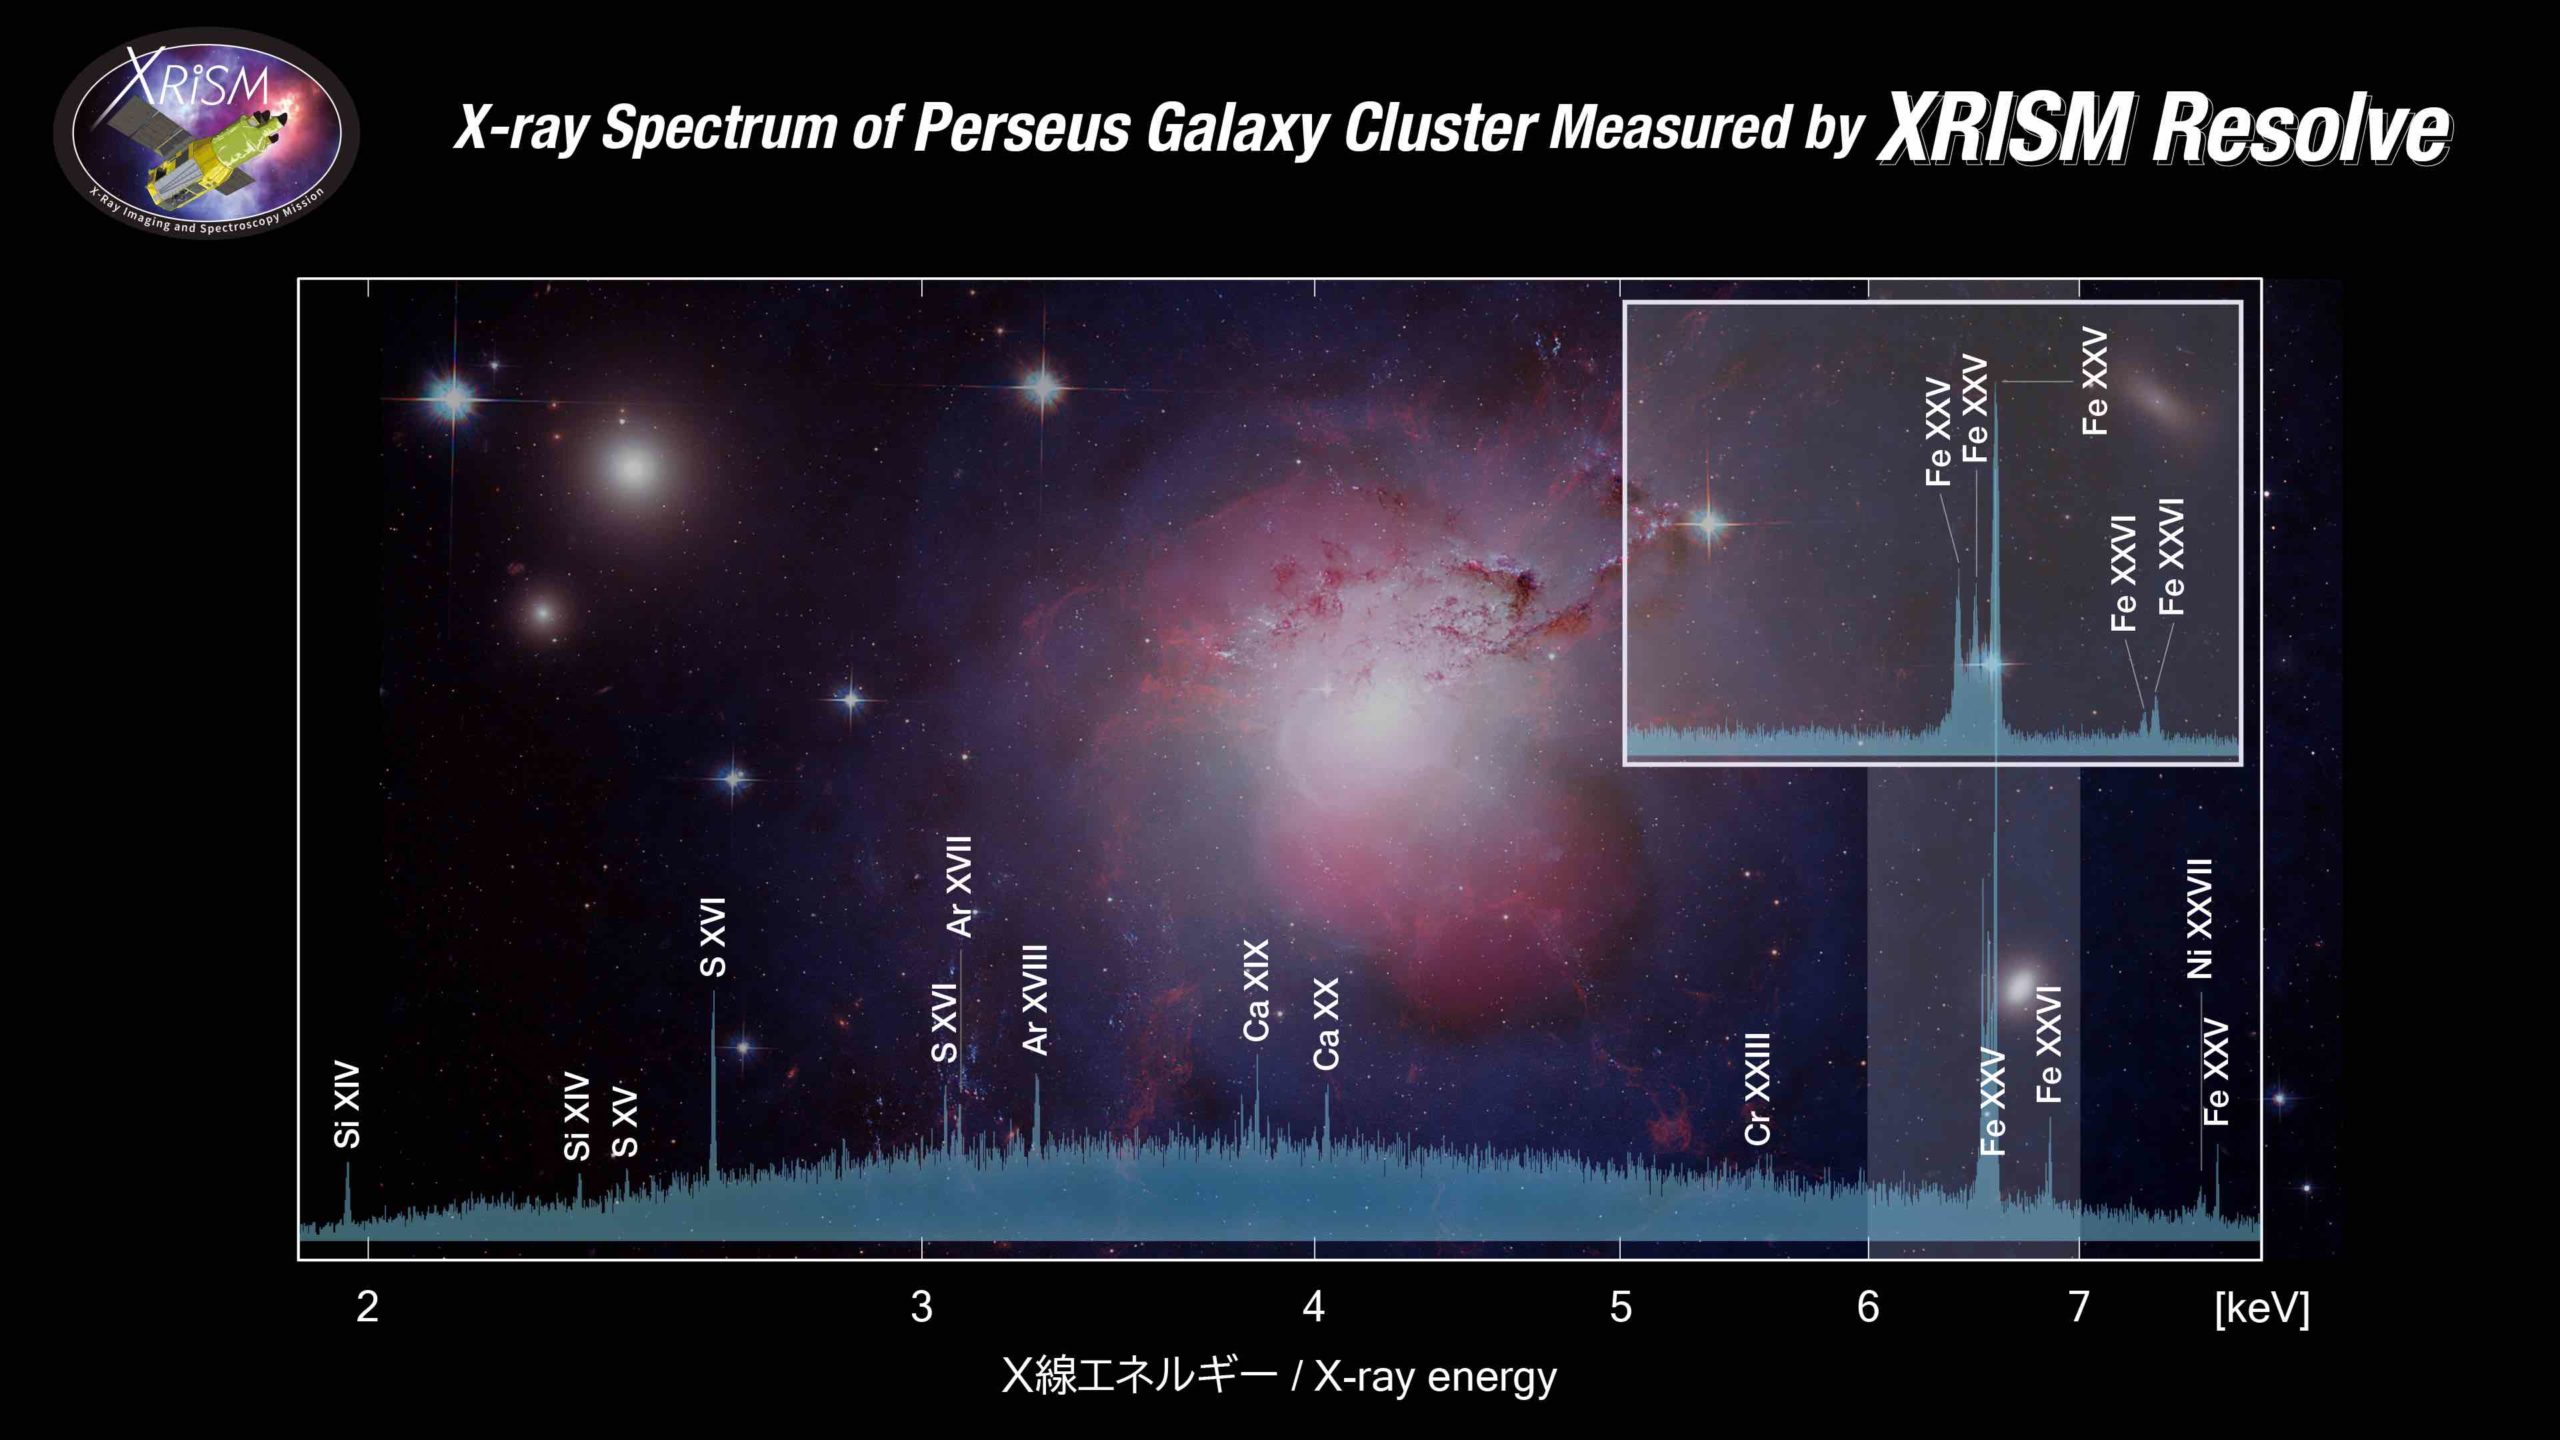 XRISM high-resolution X-ray spectrum of the Perseus Cluster and composite image of the cluster